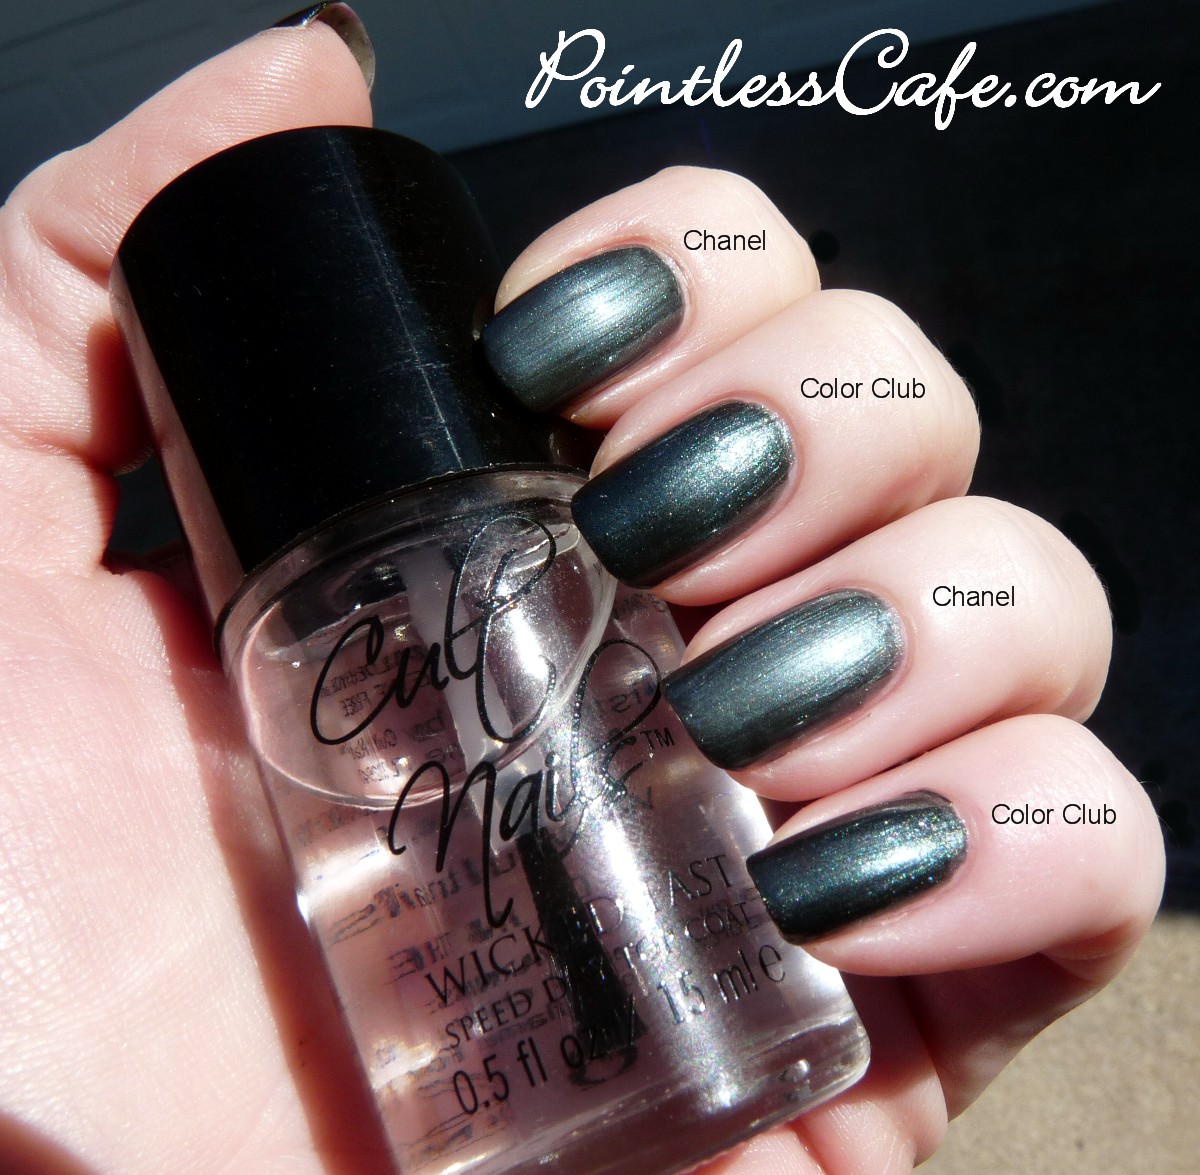 influenza Forudsætning frugtbart Pointless Cafe: Chanel Black Pearl vs Color Club Voodoo You Do - Pic Heavy